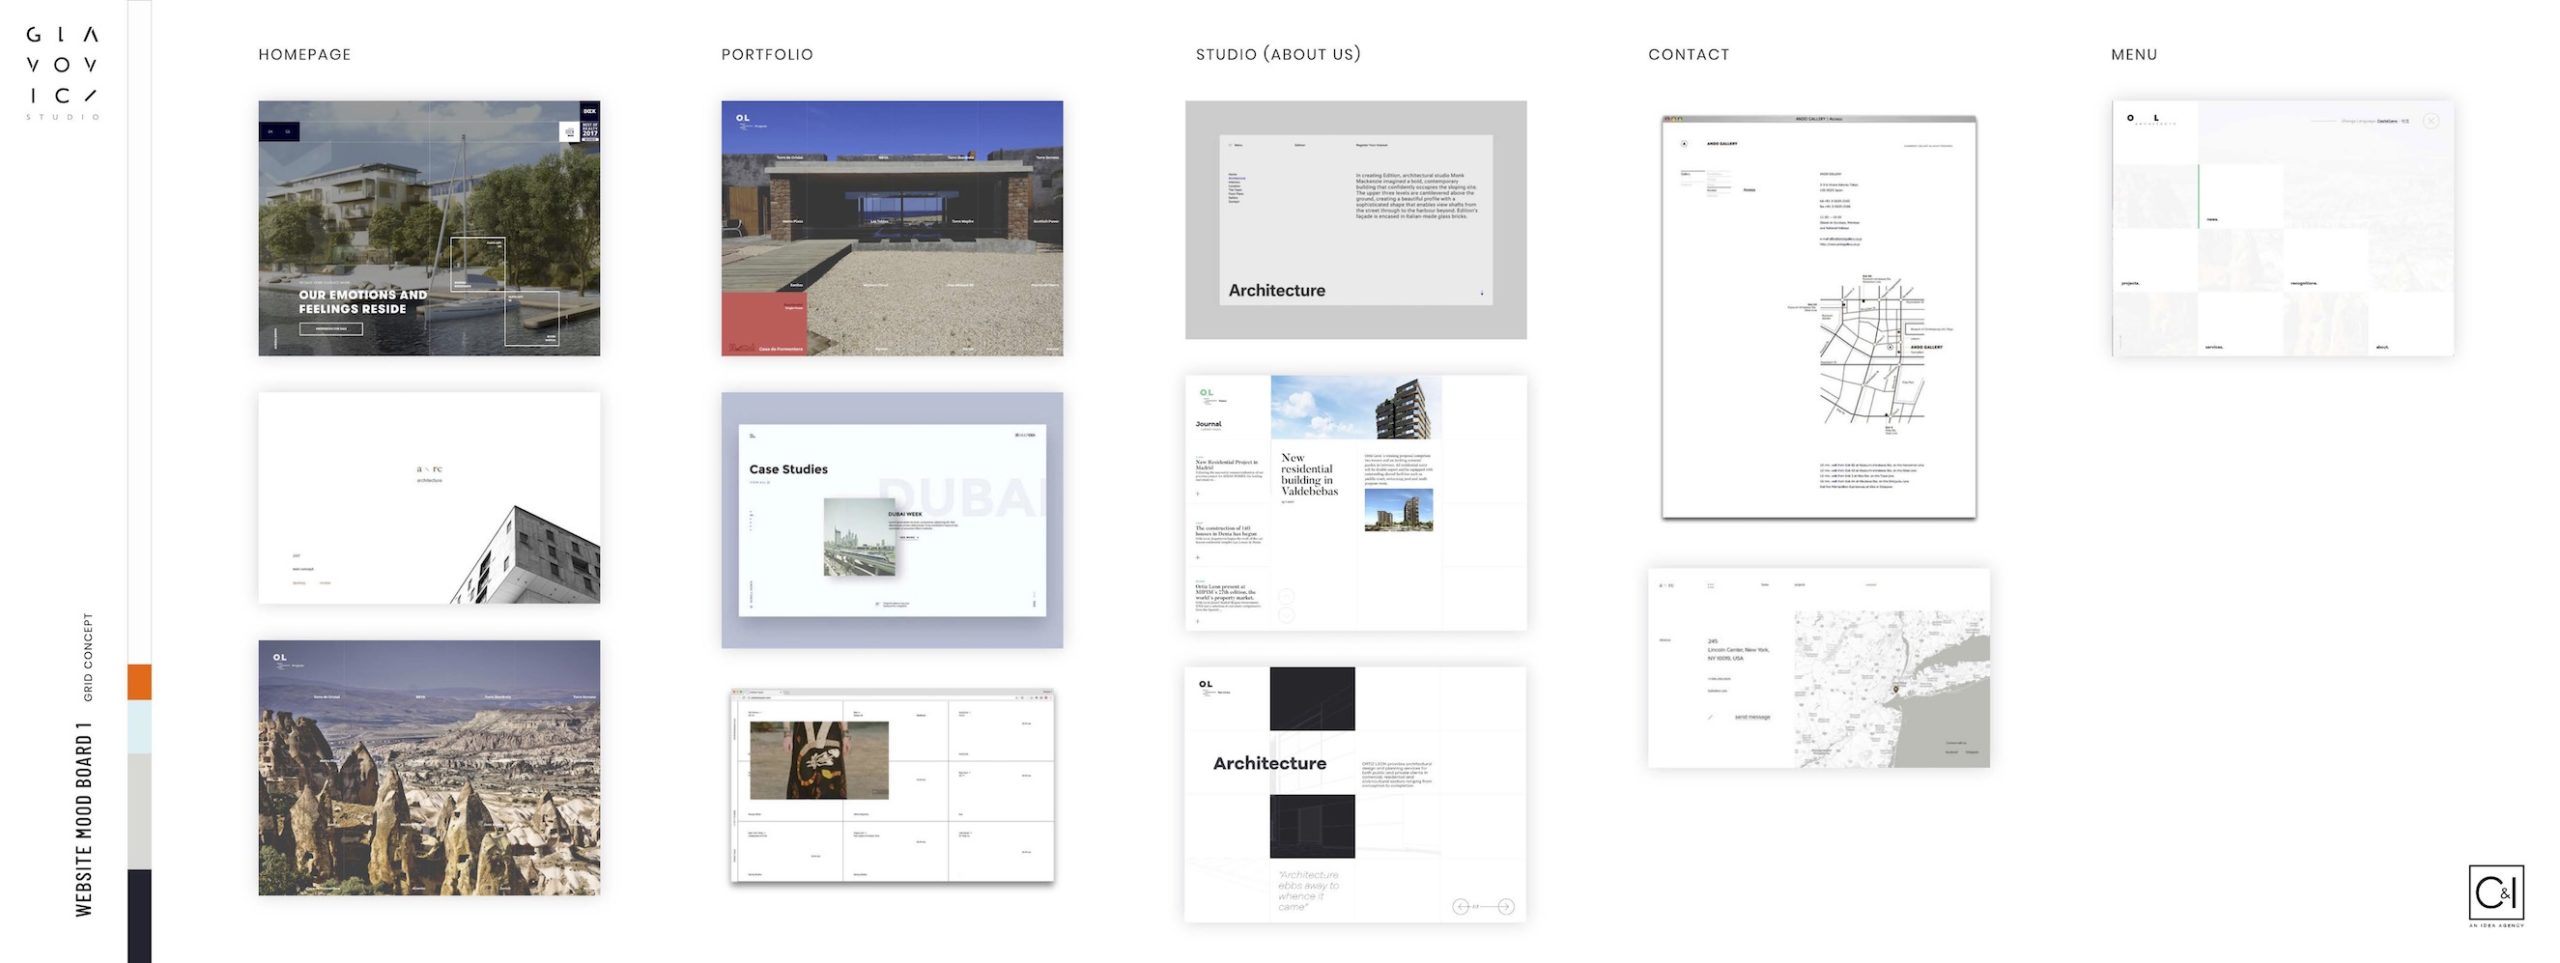 Glavovic Website Mood Board One Website sitemap with images